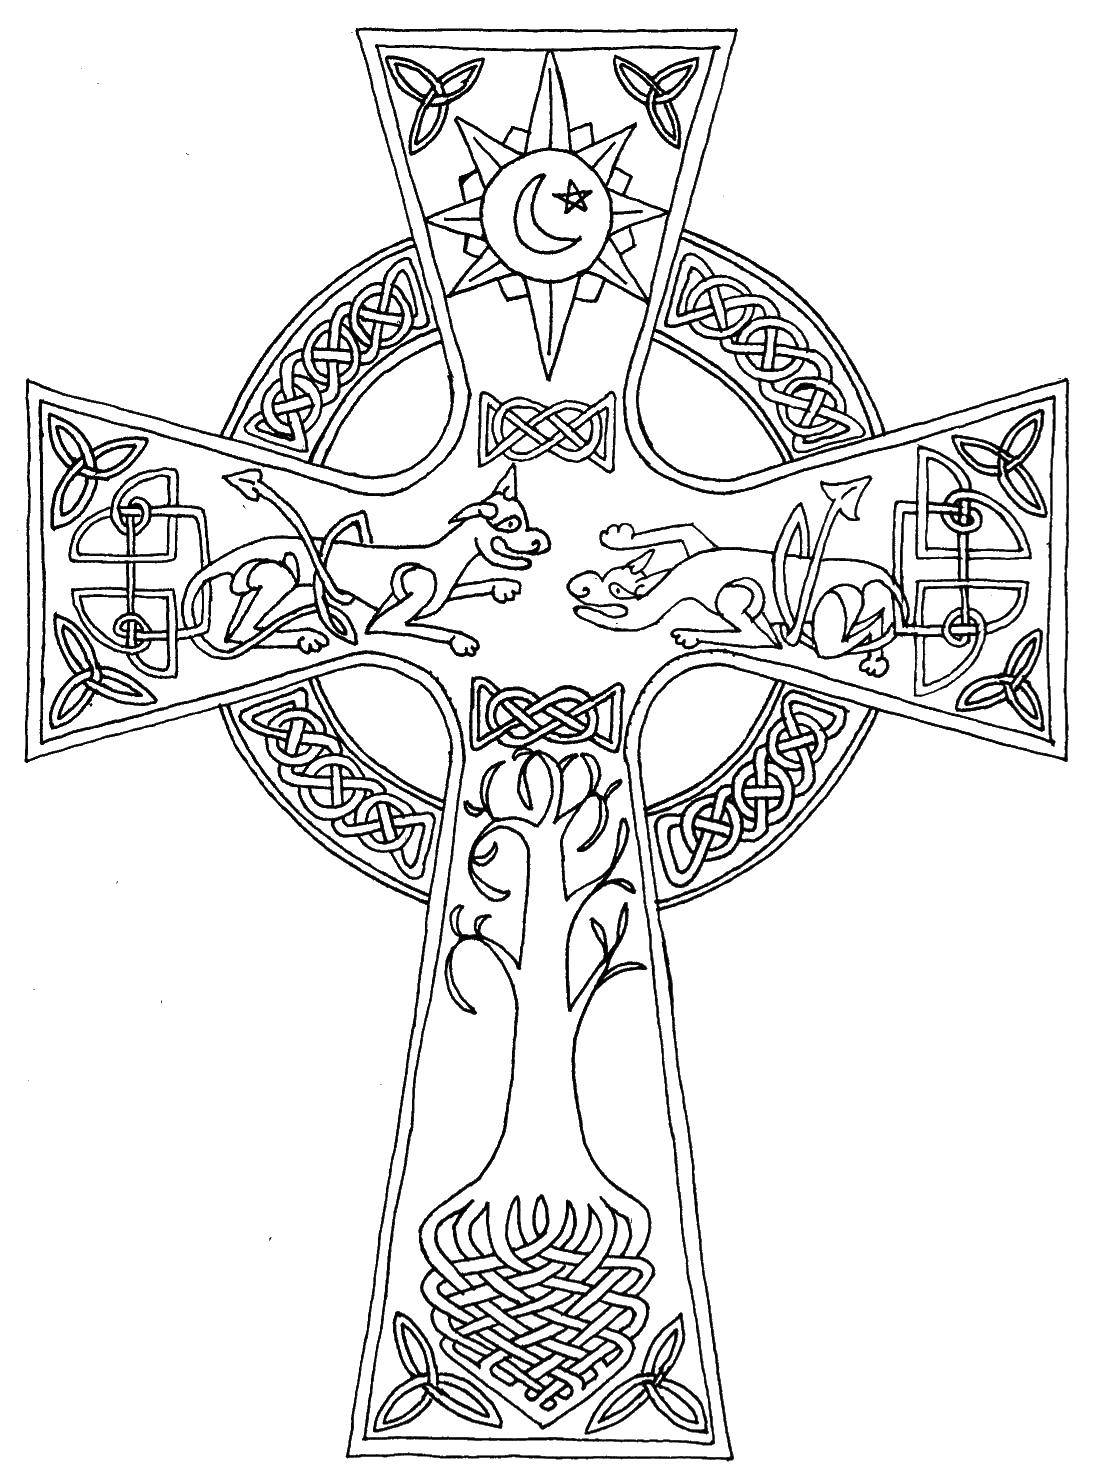 Coloring The cross with images. Category Cross. Tags:  cross, religion.